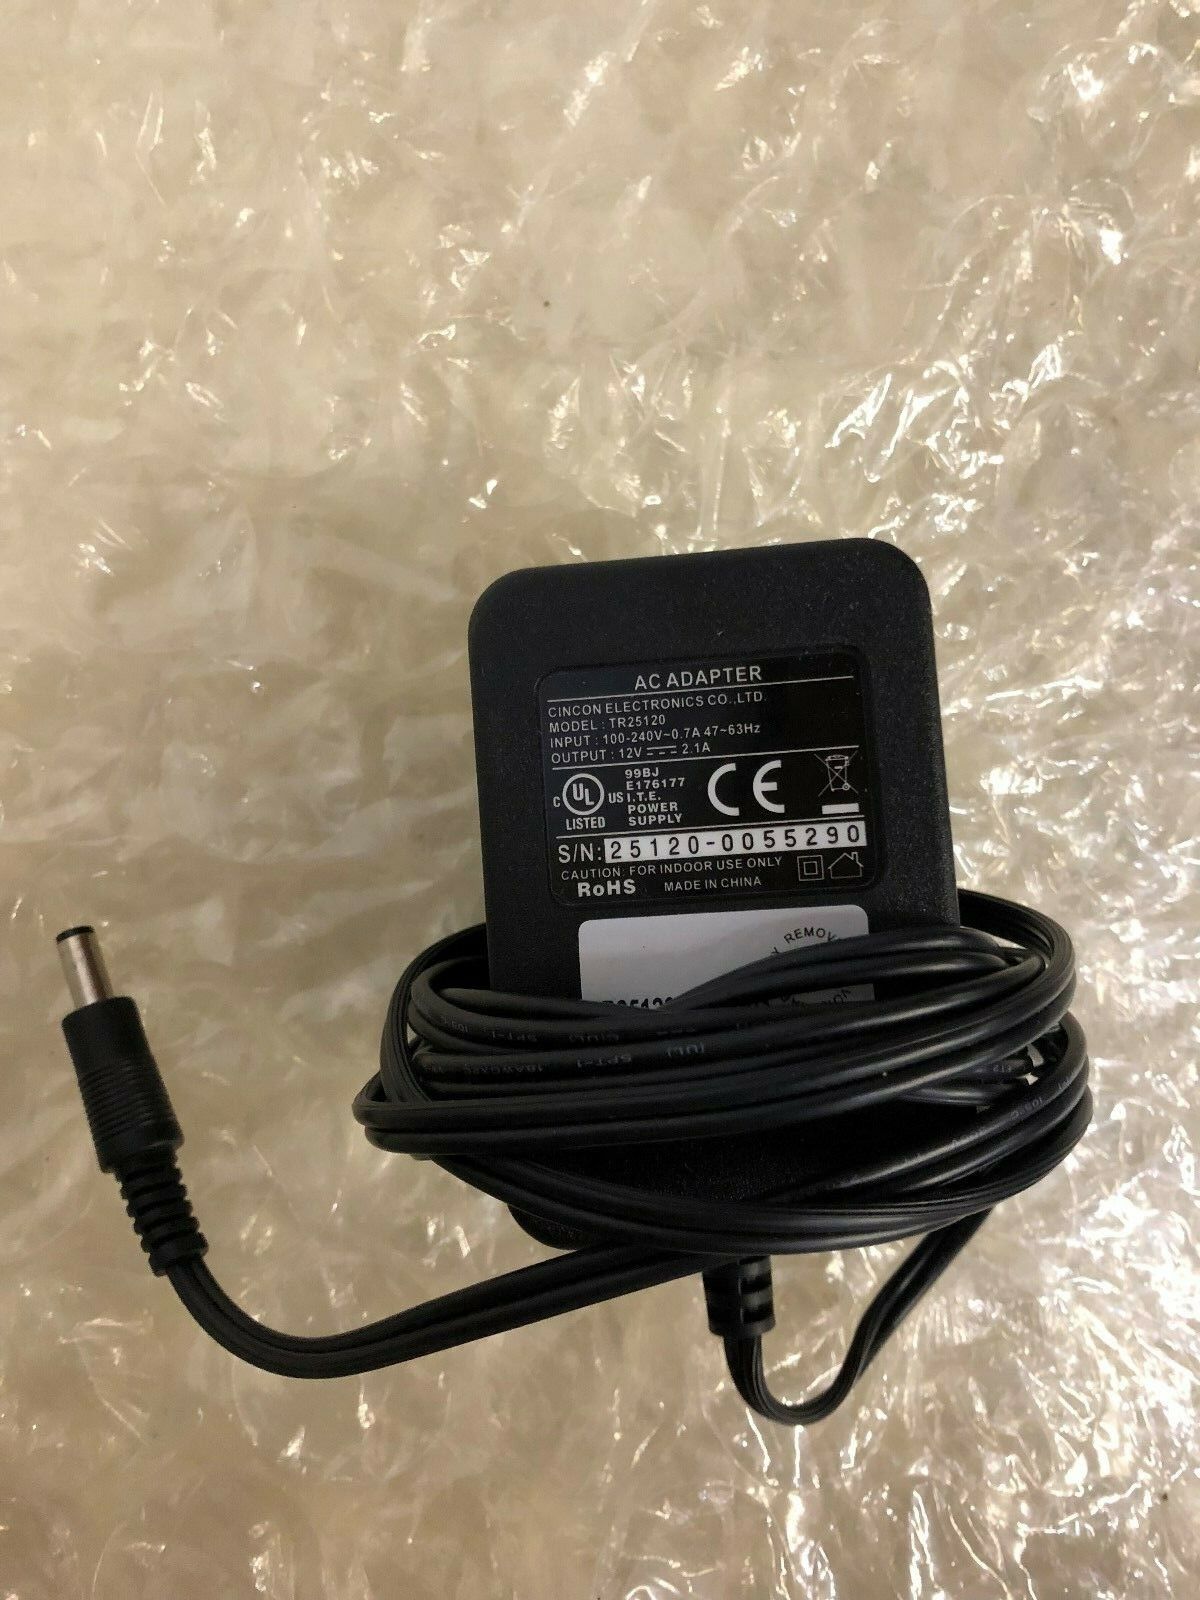 NEW CINCON ELECTRONICS TR25120 12V 2.1A AC ADAPTER